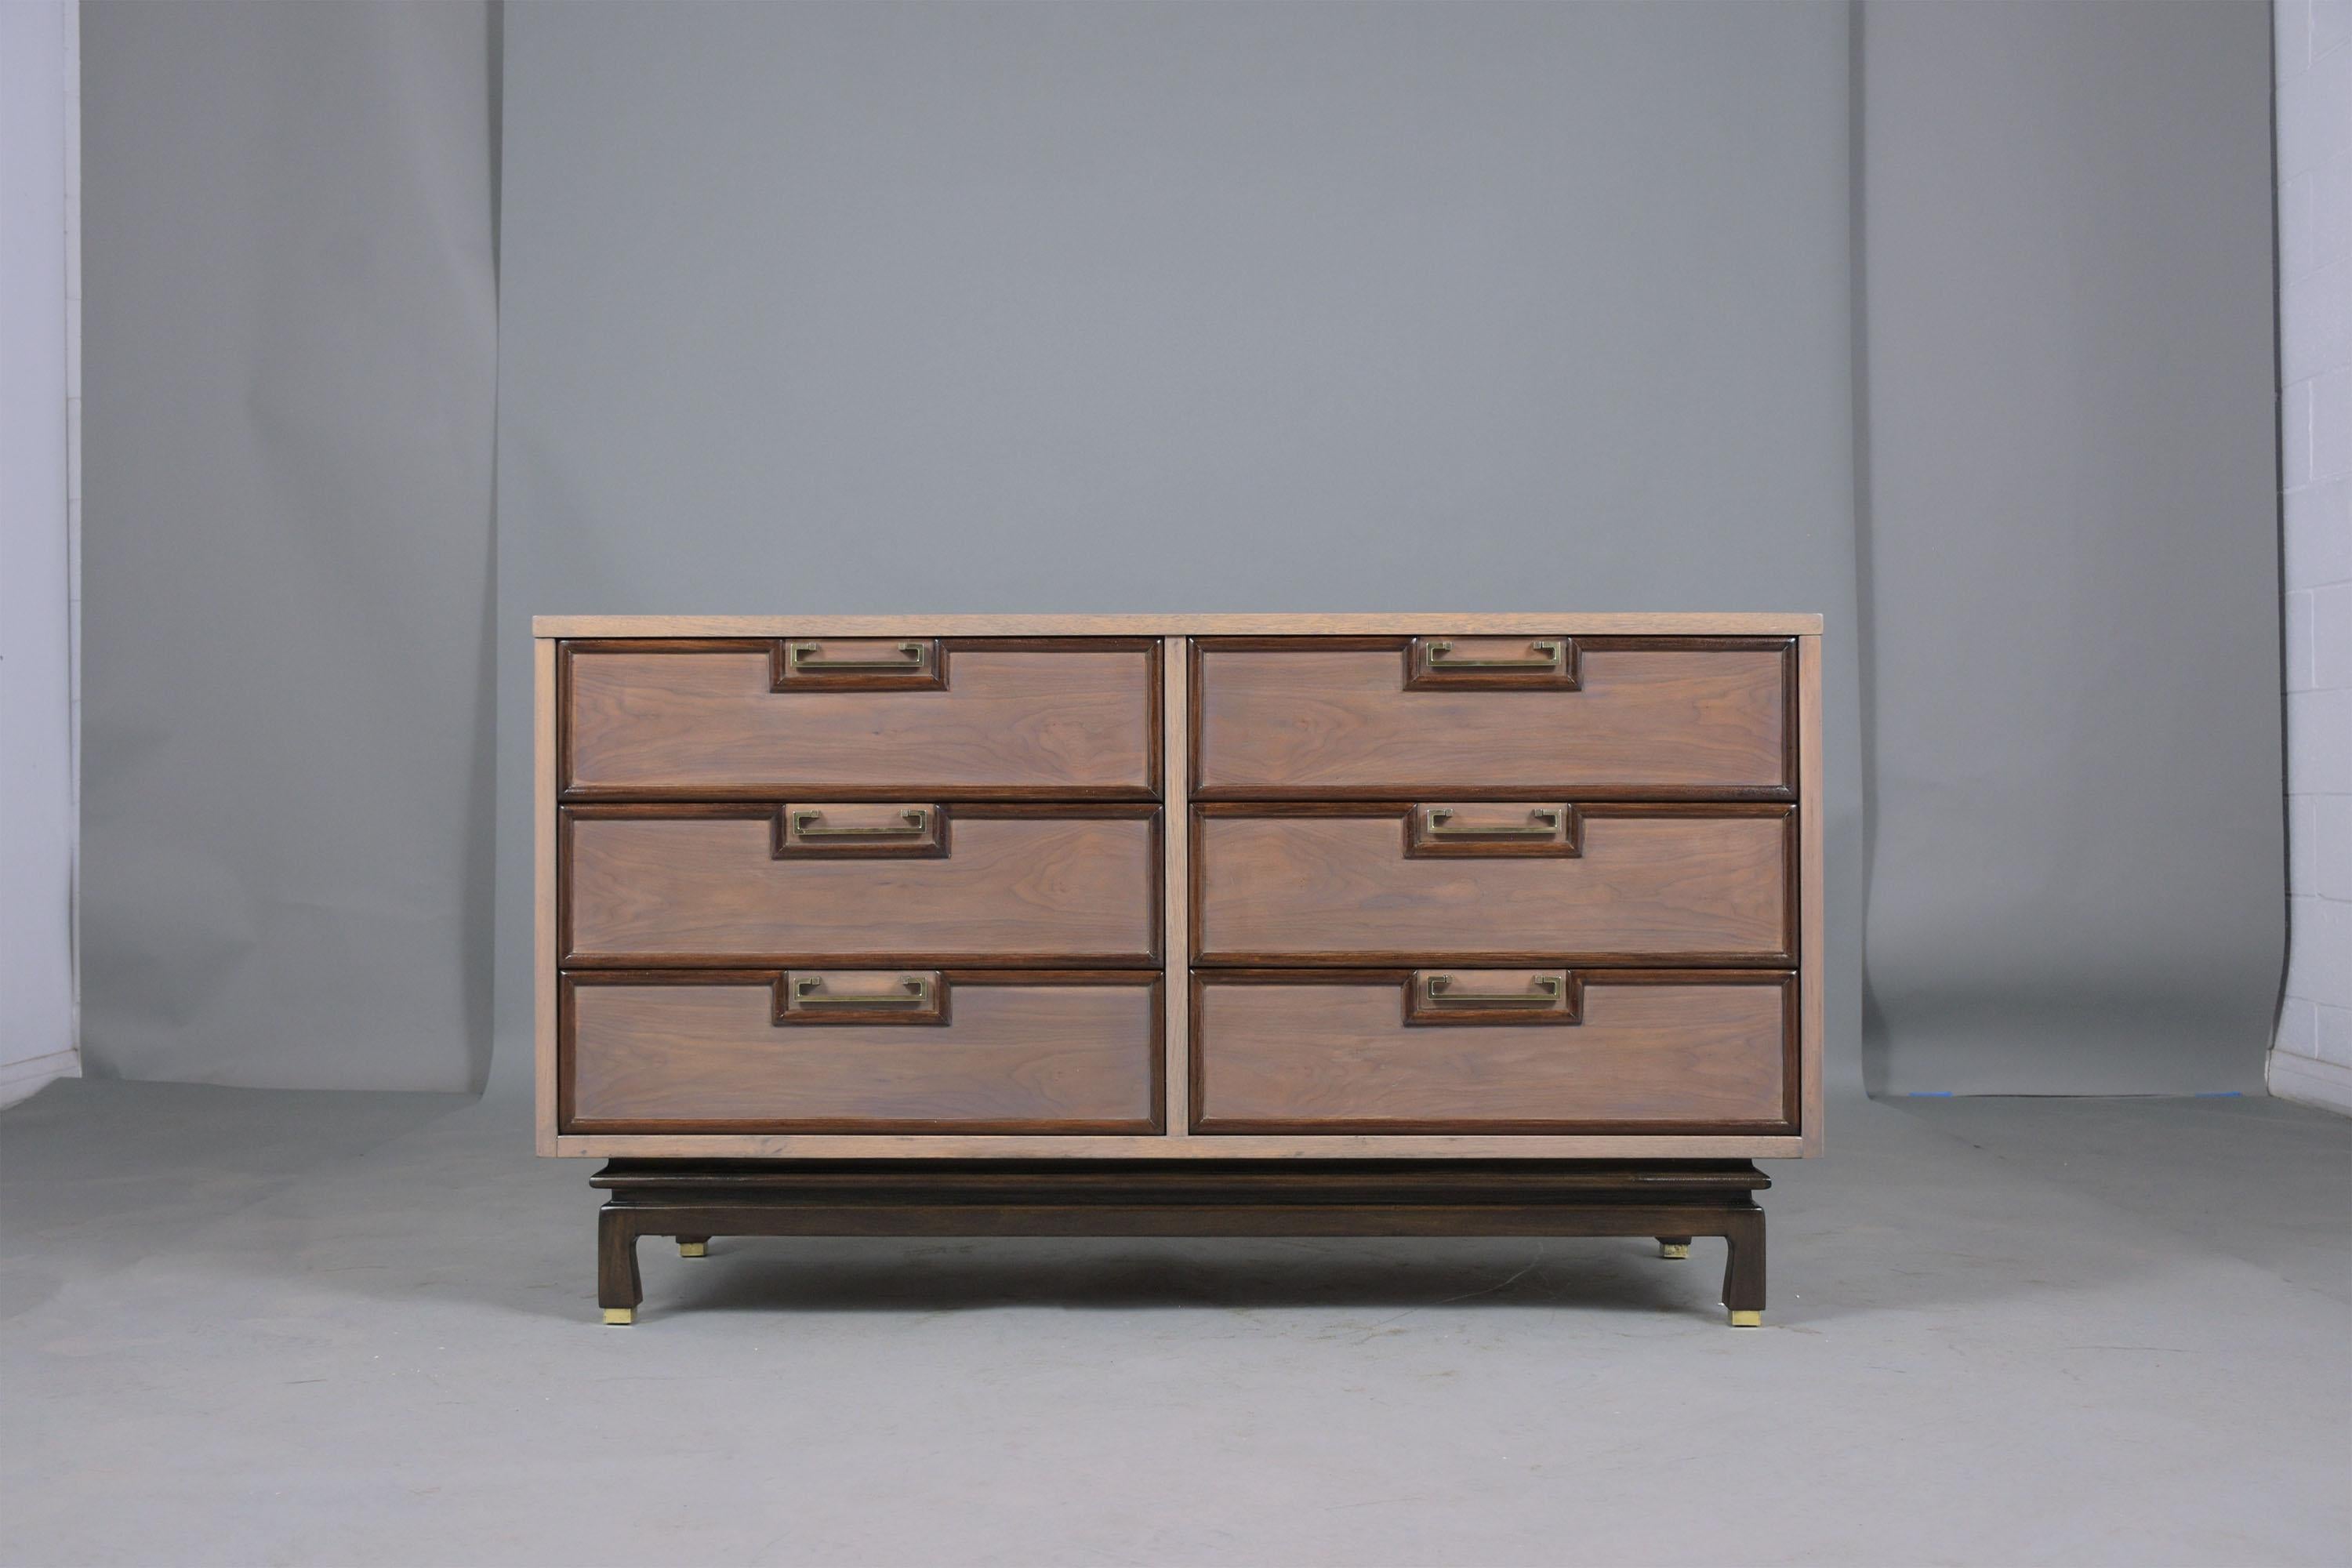 An extraordinary 1960's mid-century dresser hand-crafted out of walnut wood completed restored by our professional craftsmen team. This fabulous piece features a new light grey & brown color combination with a lacquer finish, six drawers with